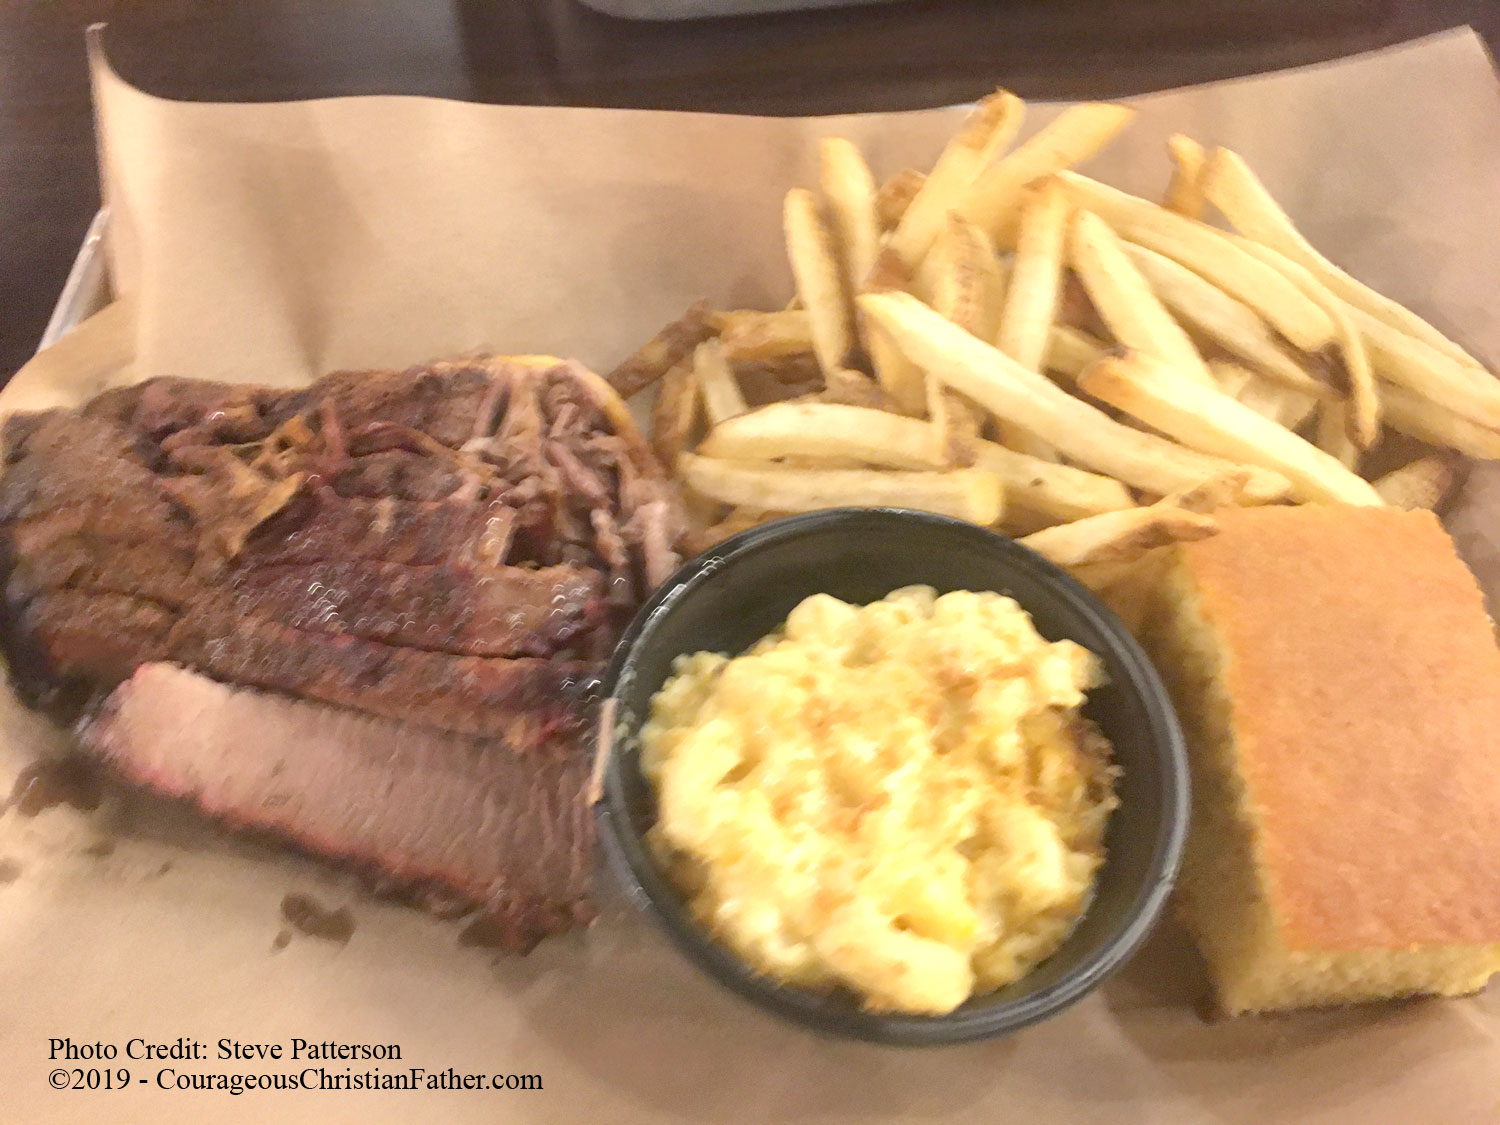 Beef Brisket - Mission BBQ - This is this weeks Travel Thursday feature. I share about my experience at Missionary BBQ in Chattanoga, TN. #MissionBBQ